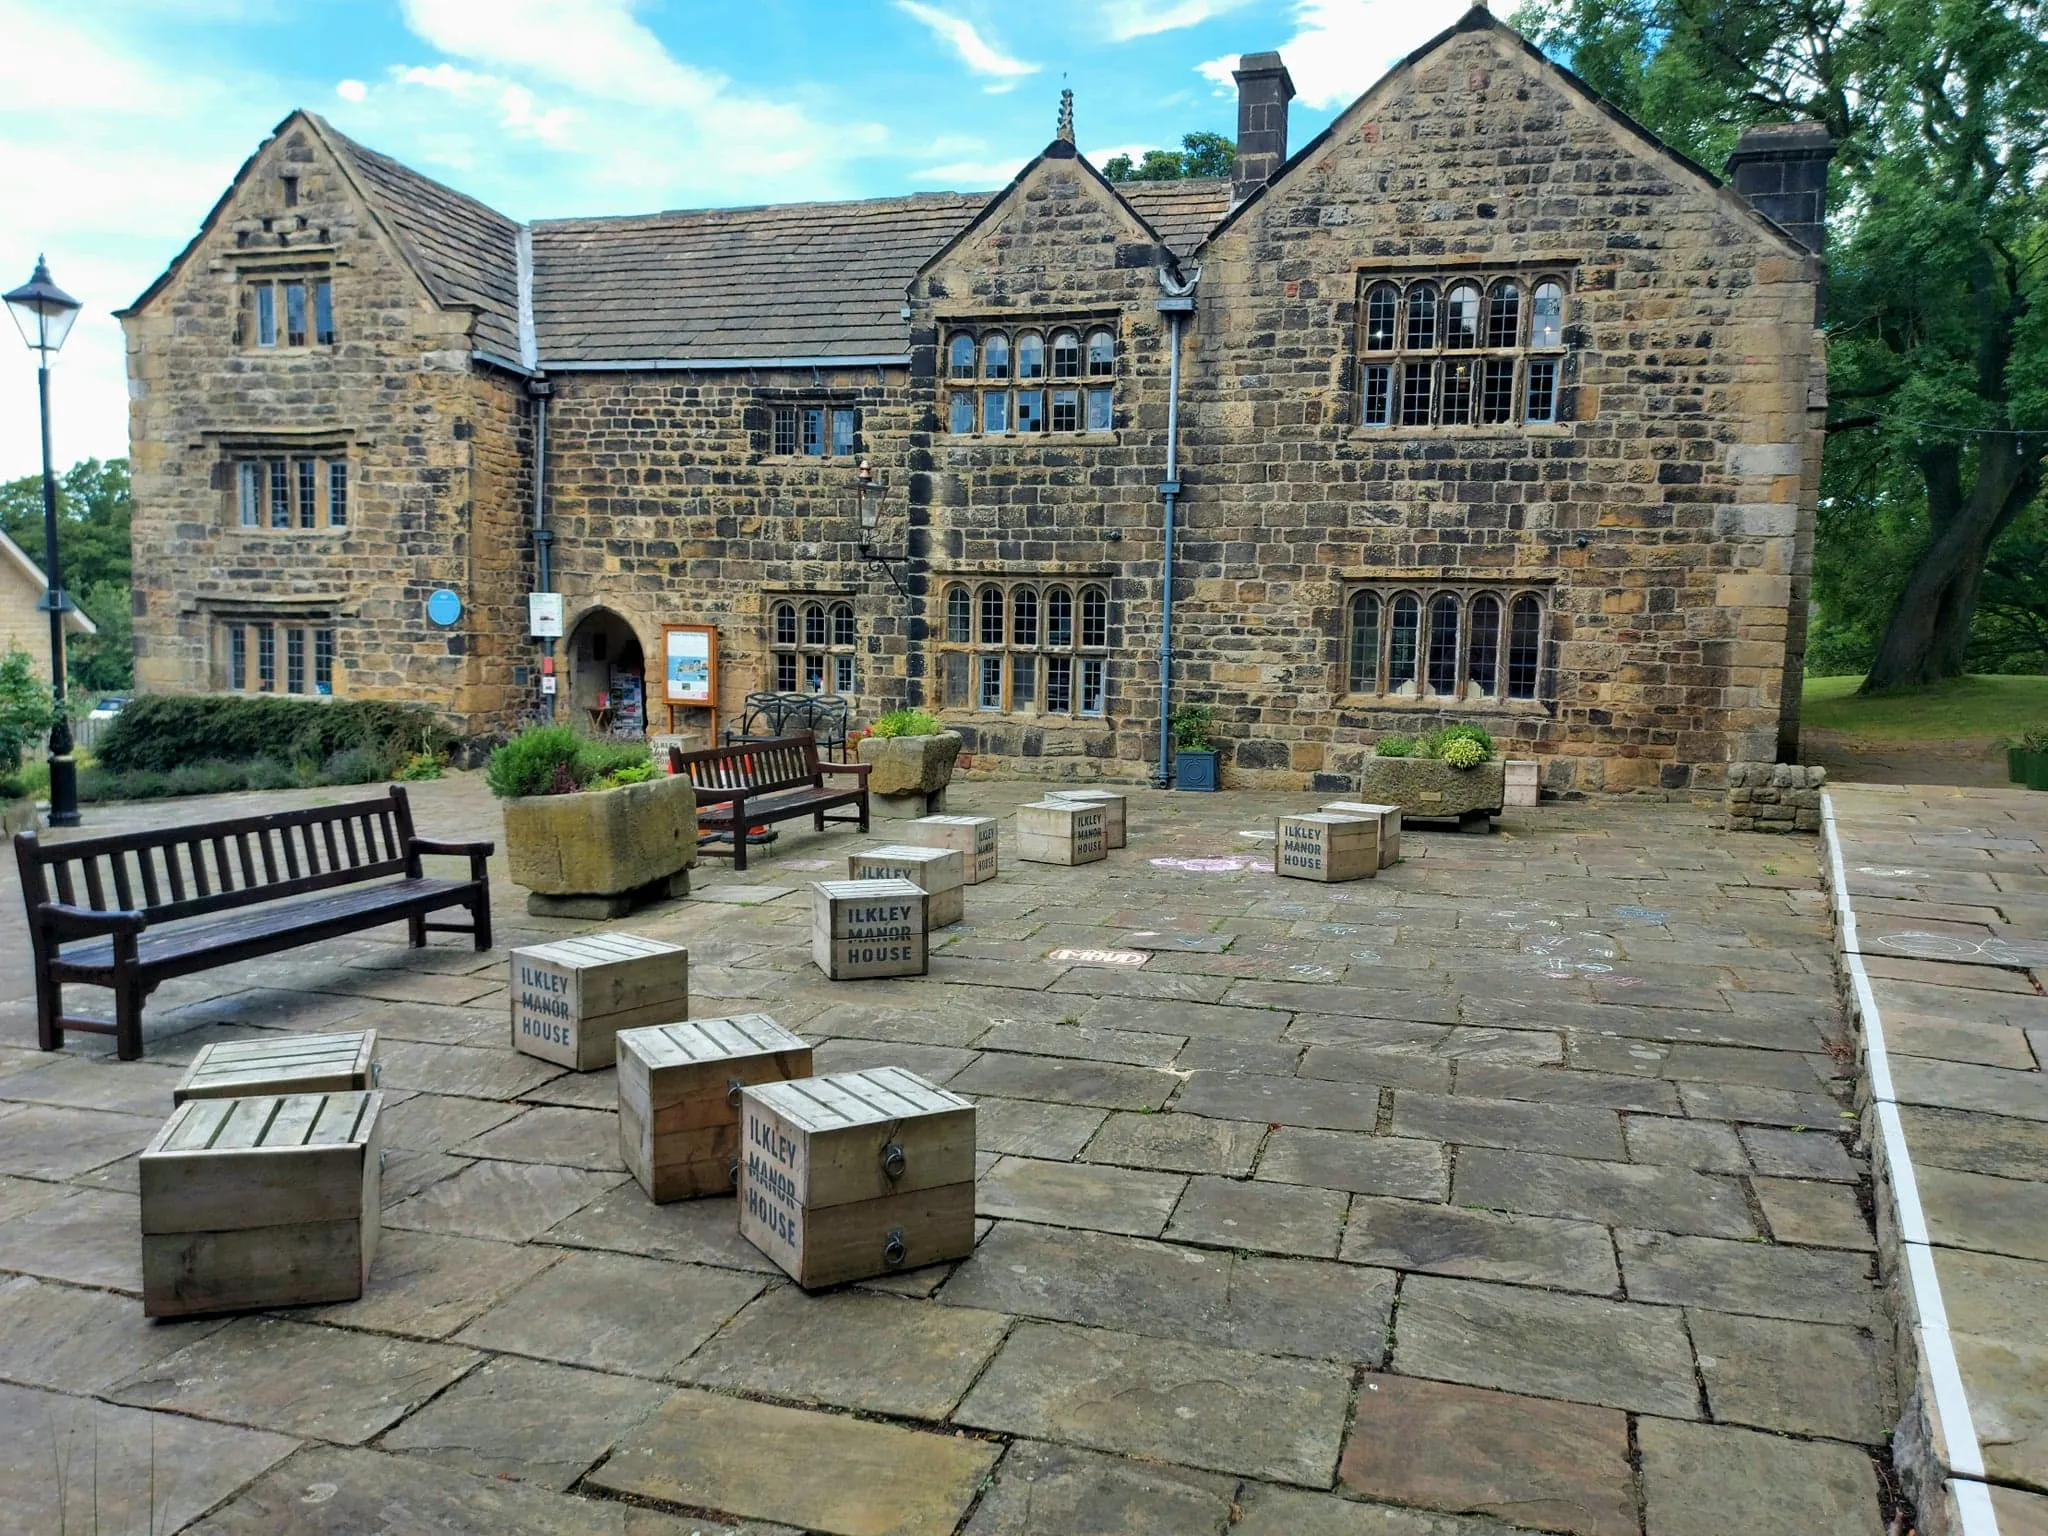 Photo showing: The front or south-facing side of Ilkley Manor House; a tripartite Medieval building in Ilkley, West Yorkshire. You can also see the courtyard where there are boxes stencilled with the Manor House logo.